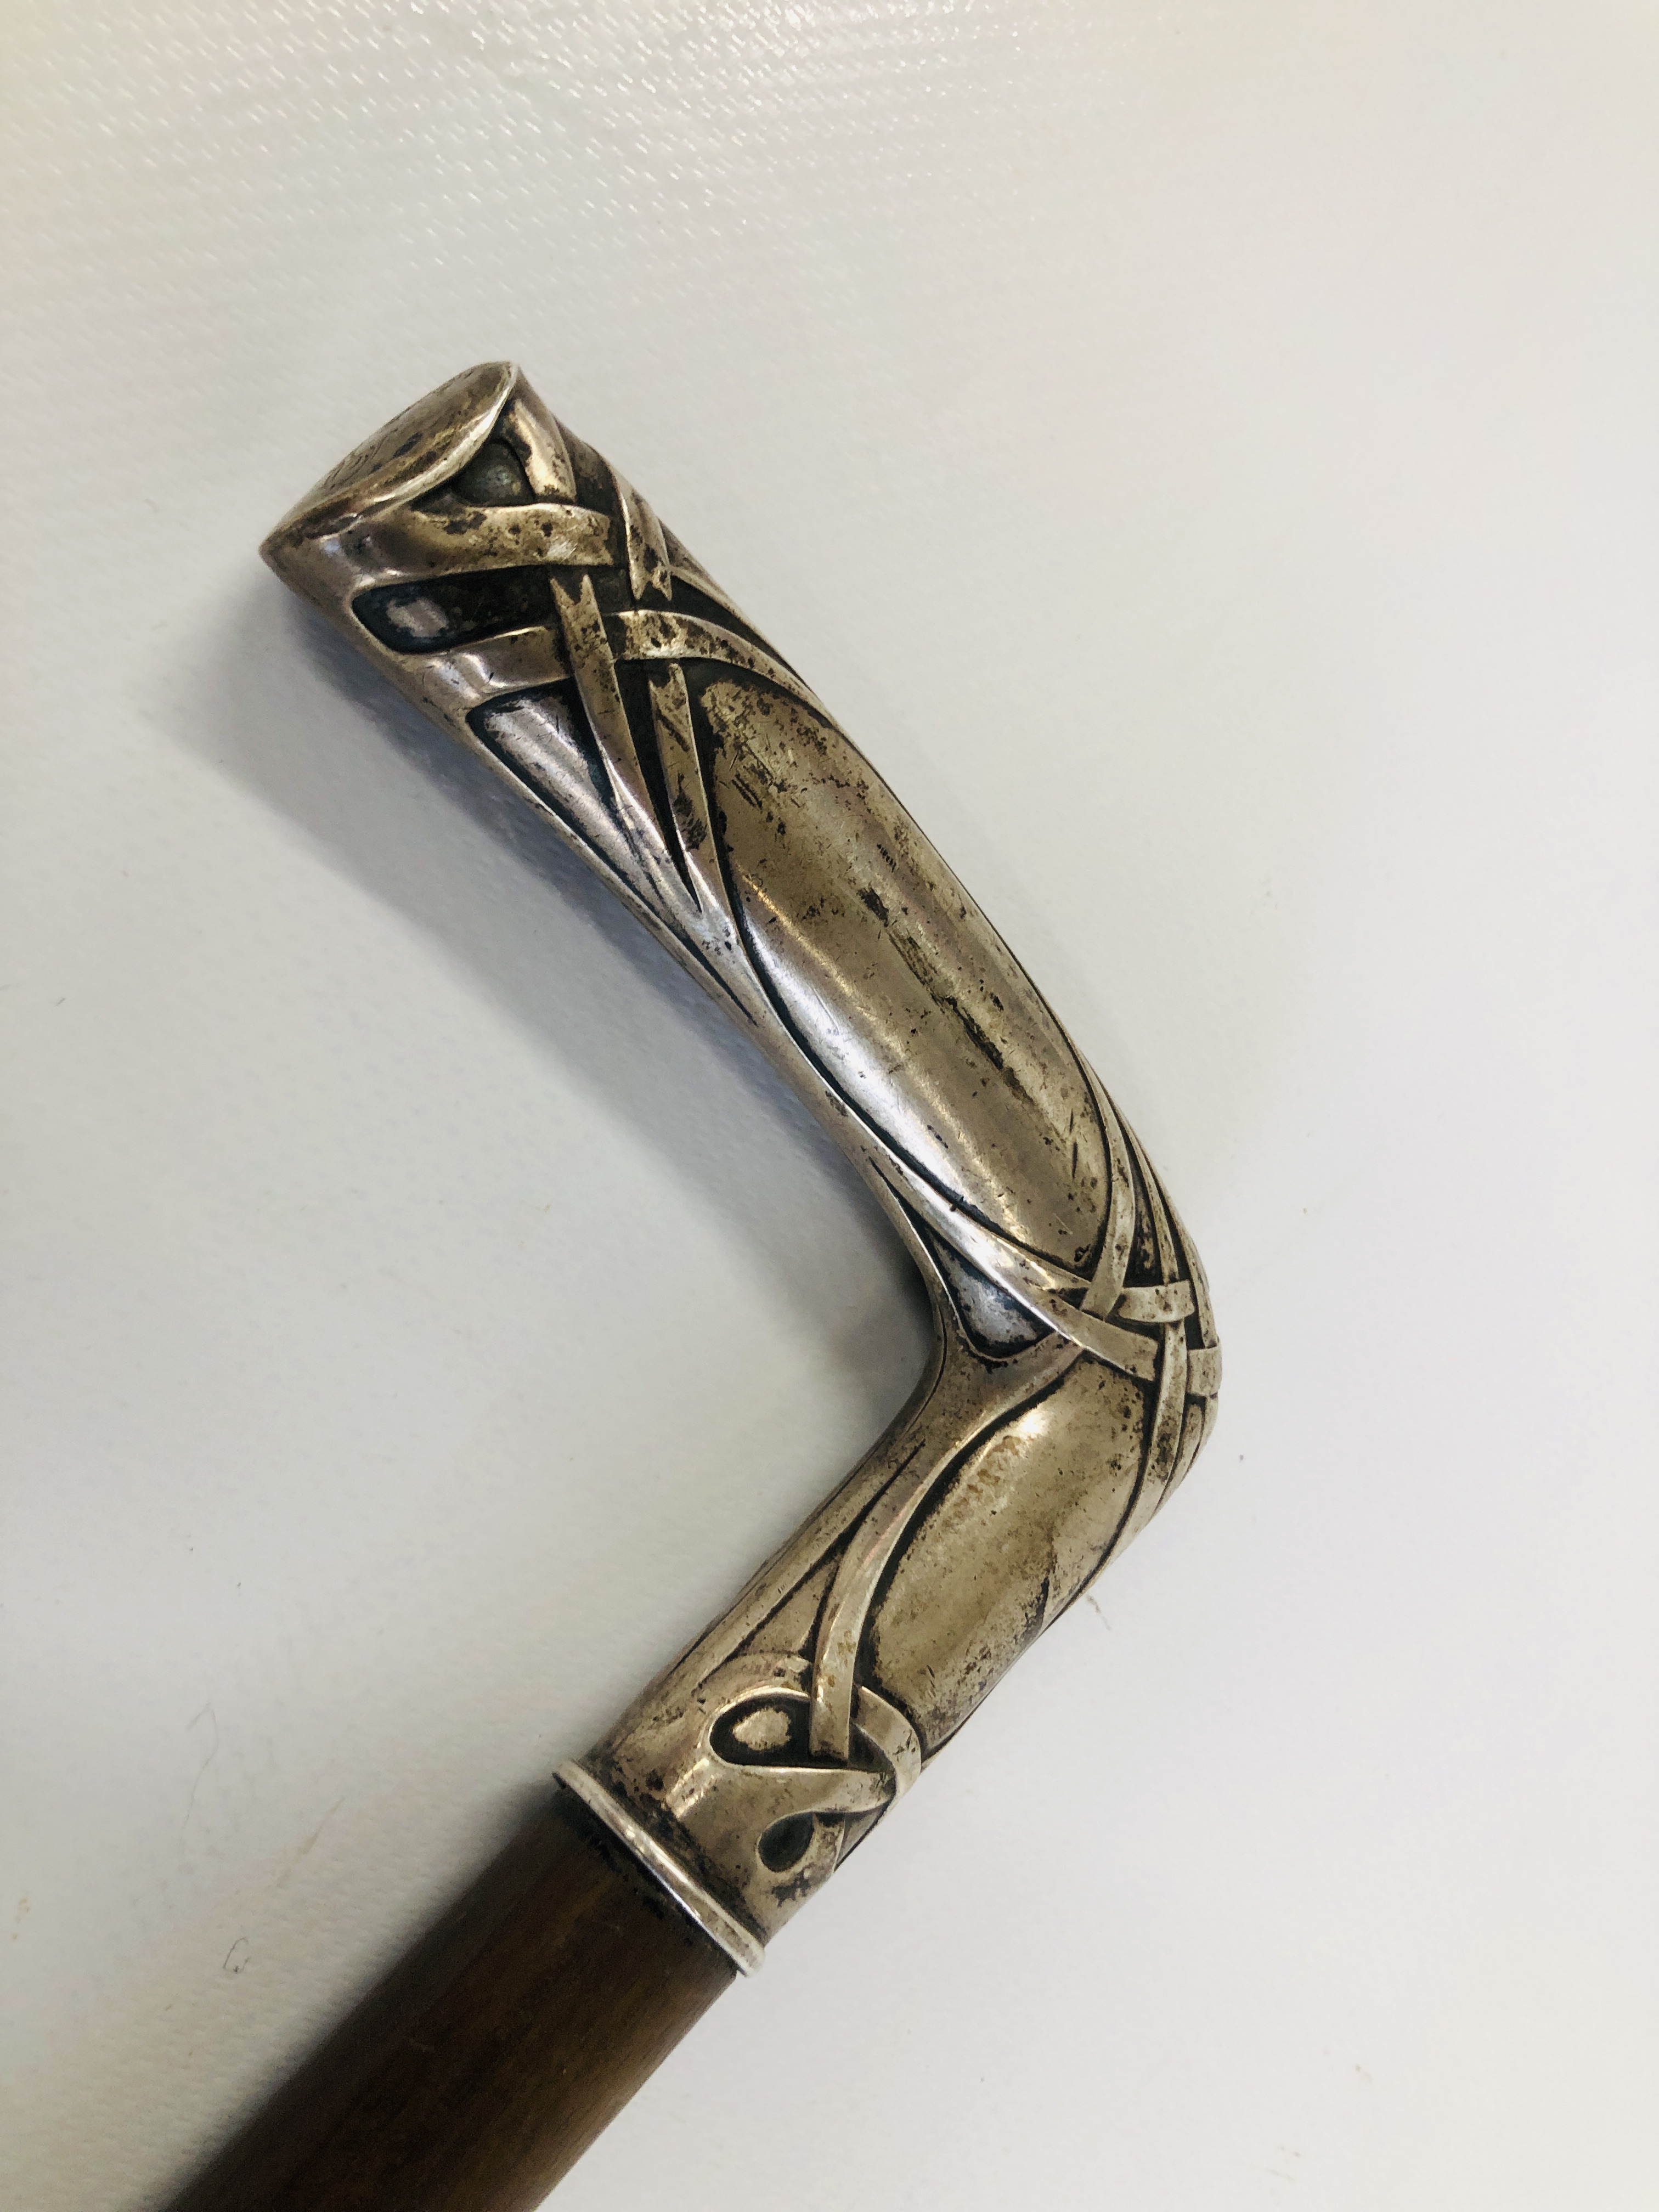 A VINTAGE WALKING CANE WITH SILVER HANDLE IN THE ART NOUVEAU STYLE MARKED 800 CESCH. - Image 8 of 9